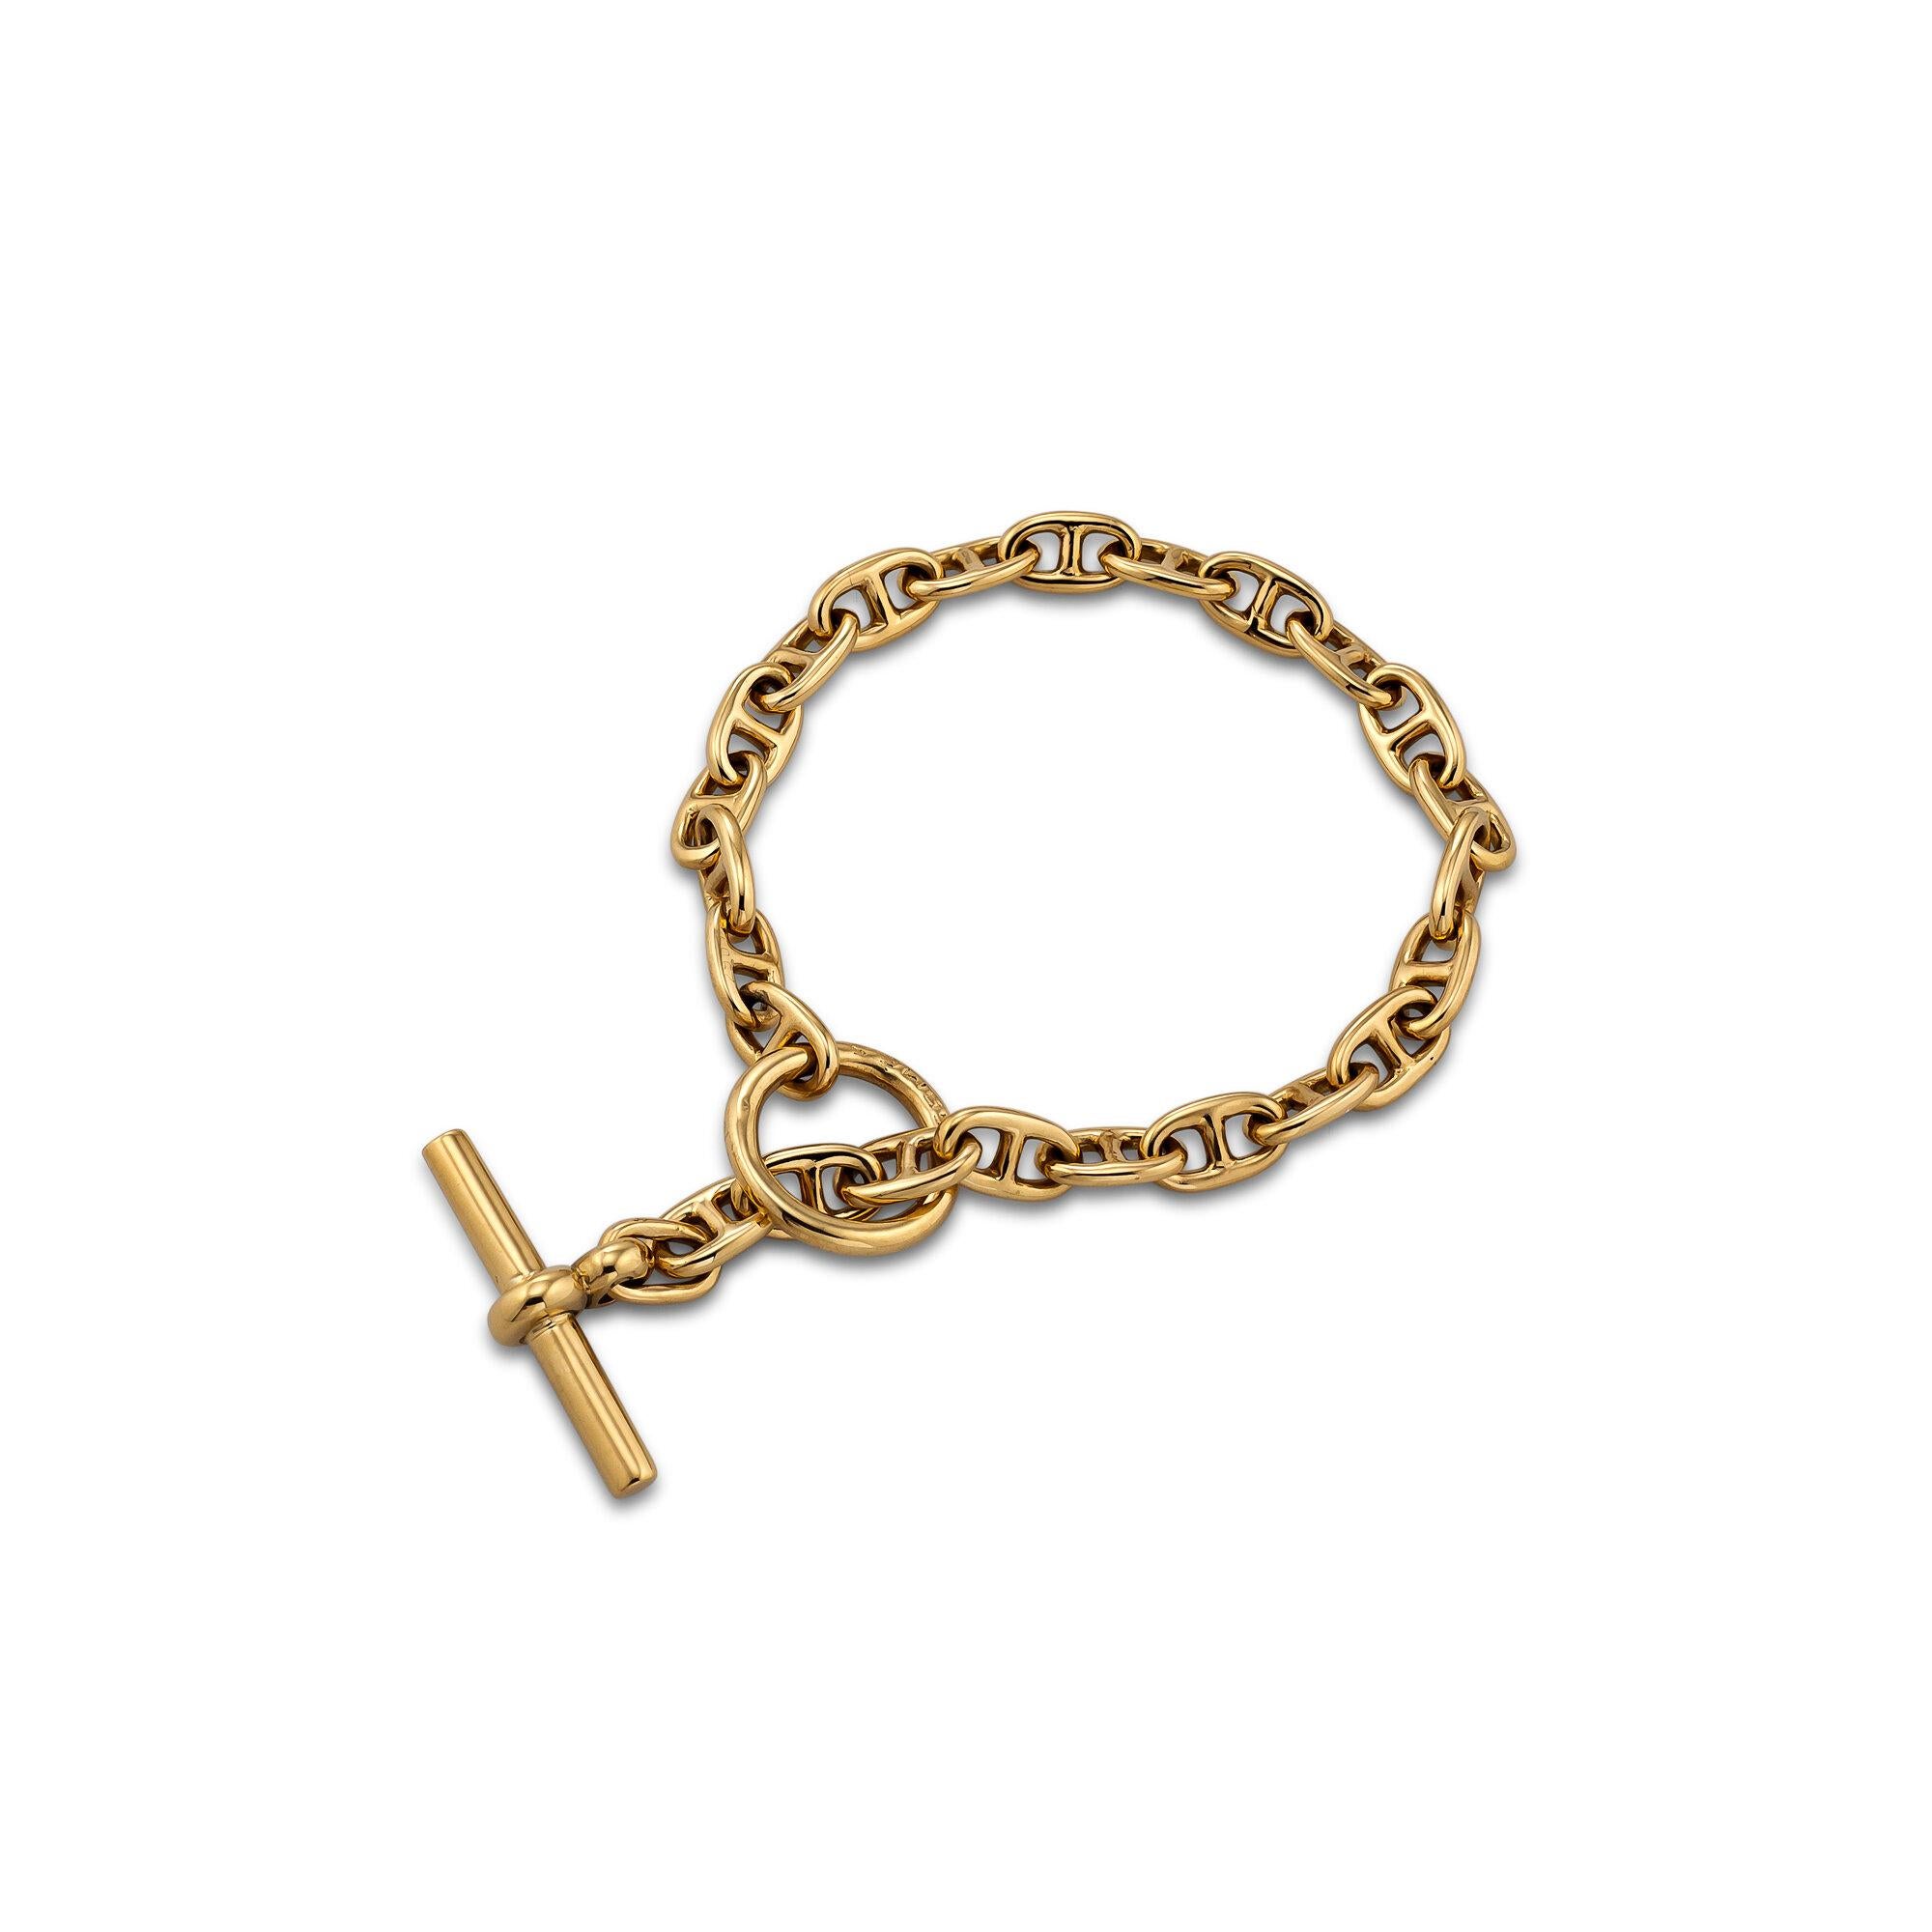 A perfect collectible to stack with all your other bracelets, this 1980's Hermes Paris petite 18 karat yellow gold anchor link bracelet is meant to be worn and admired 24/7.  7